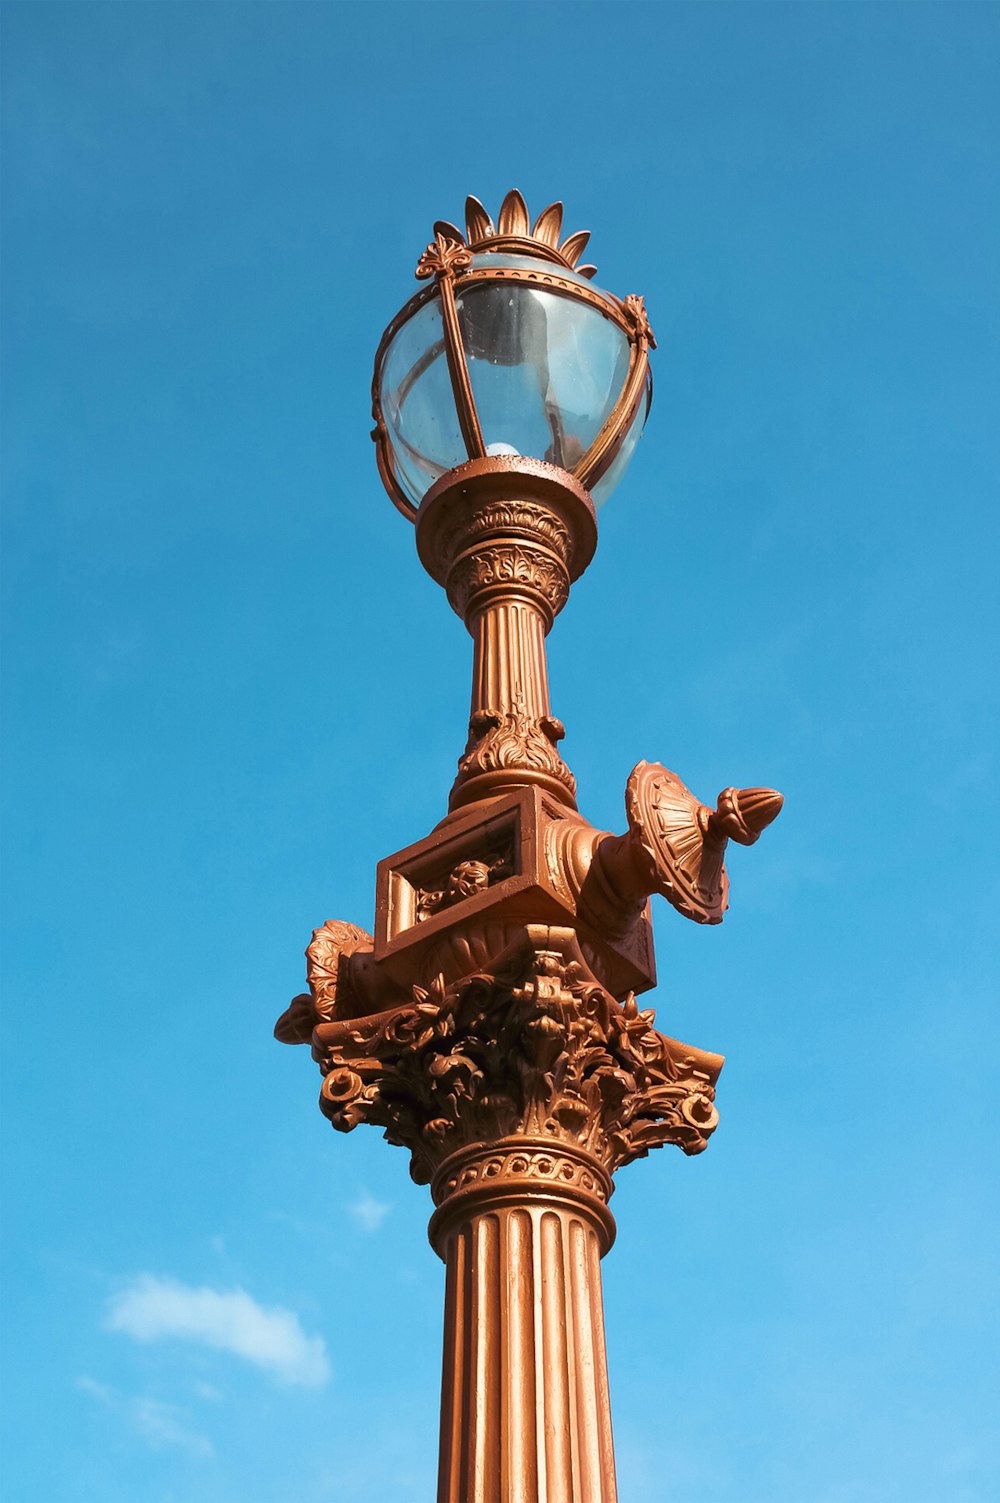 a lamp post with a bird statue on top of it